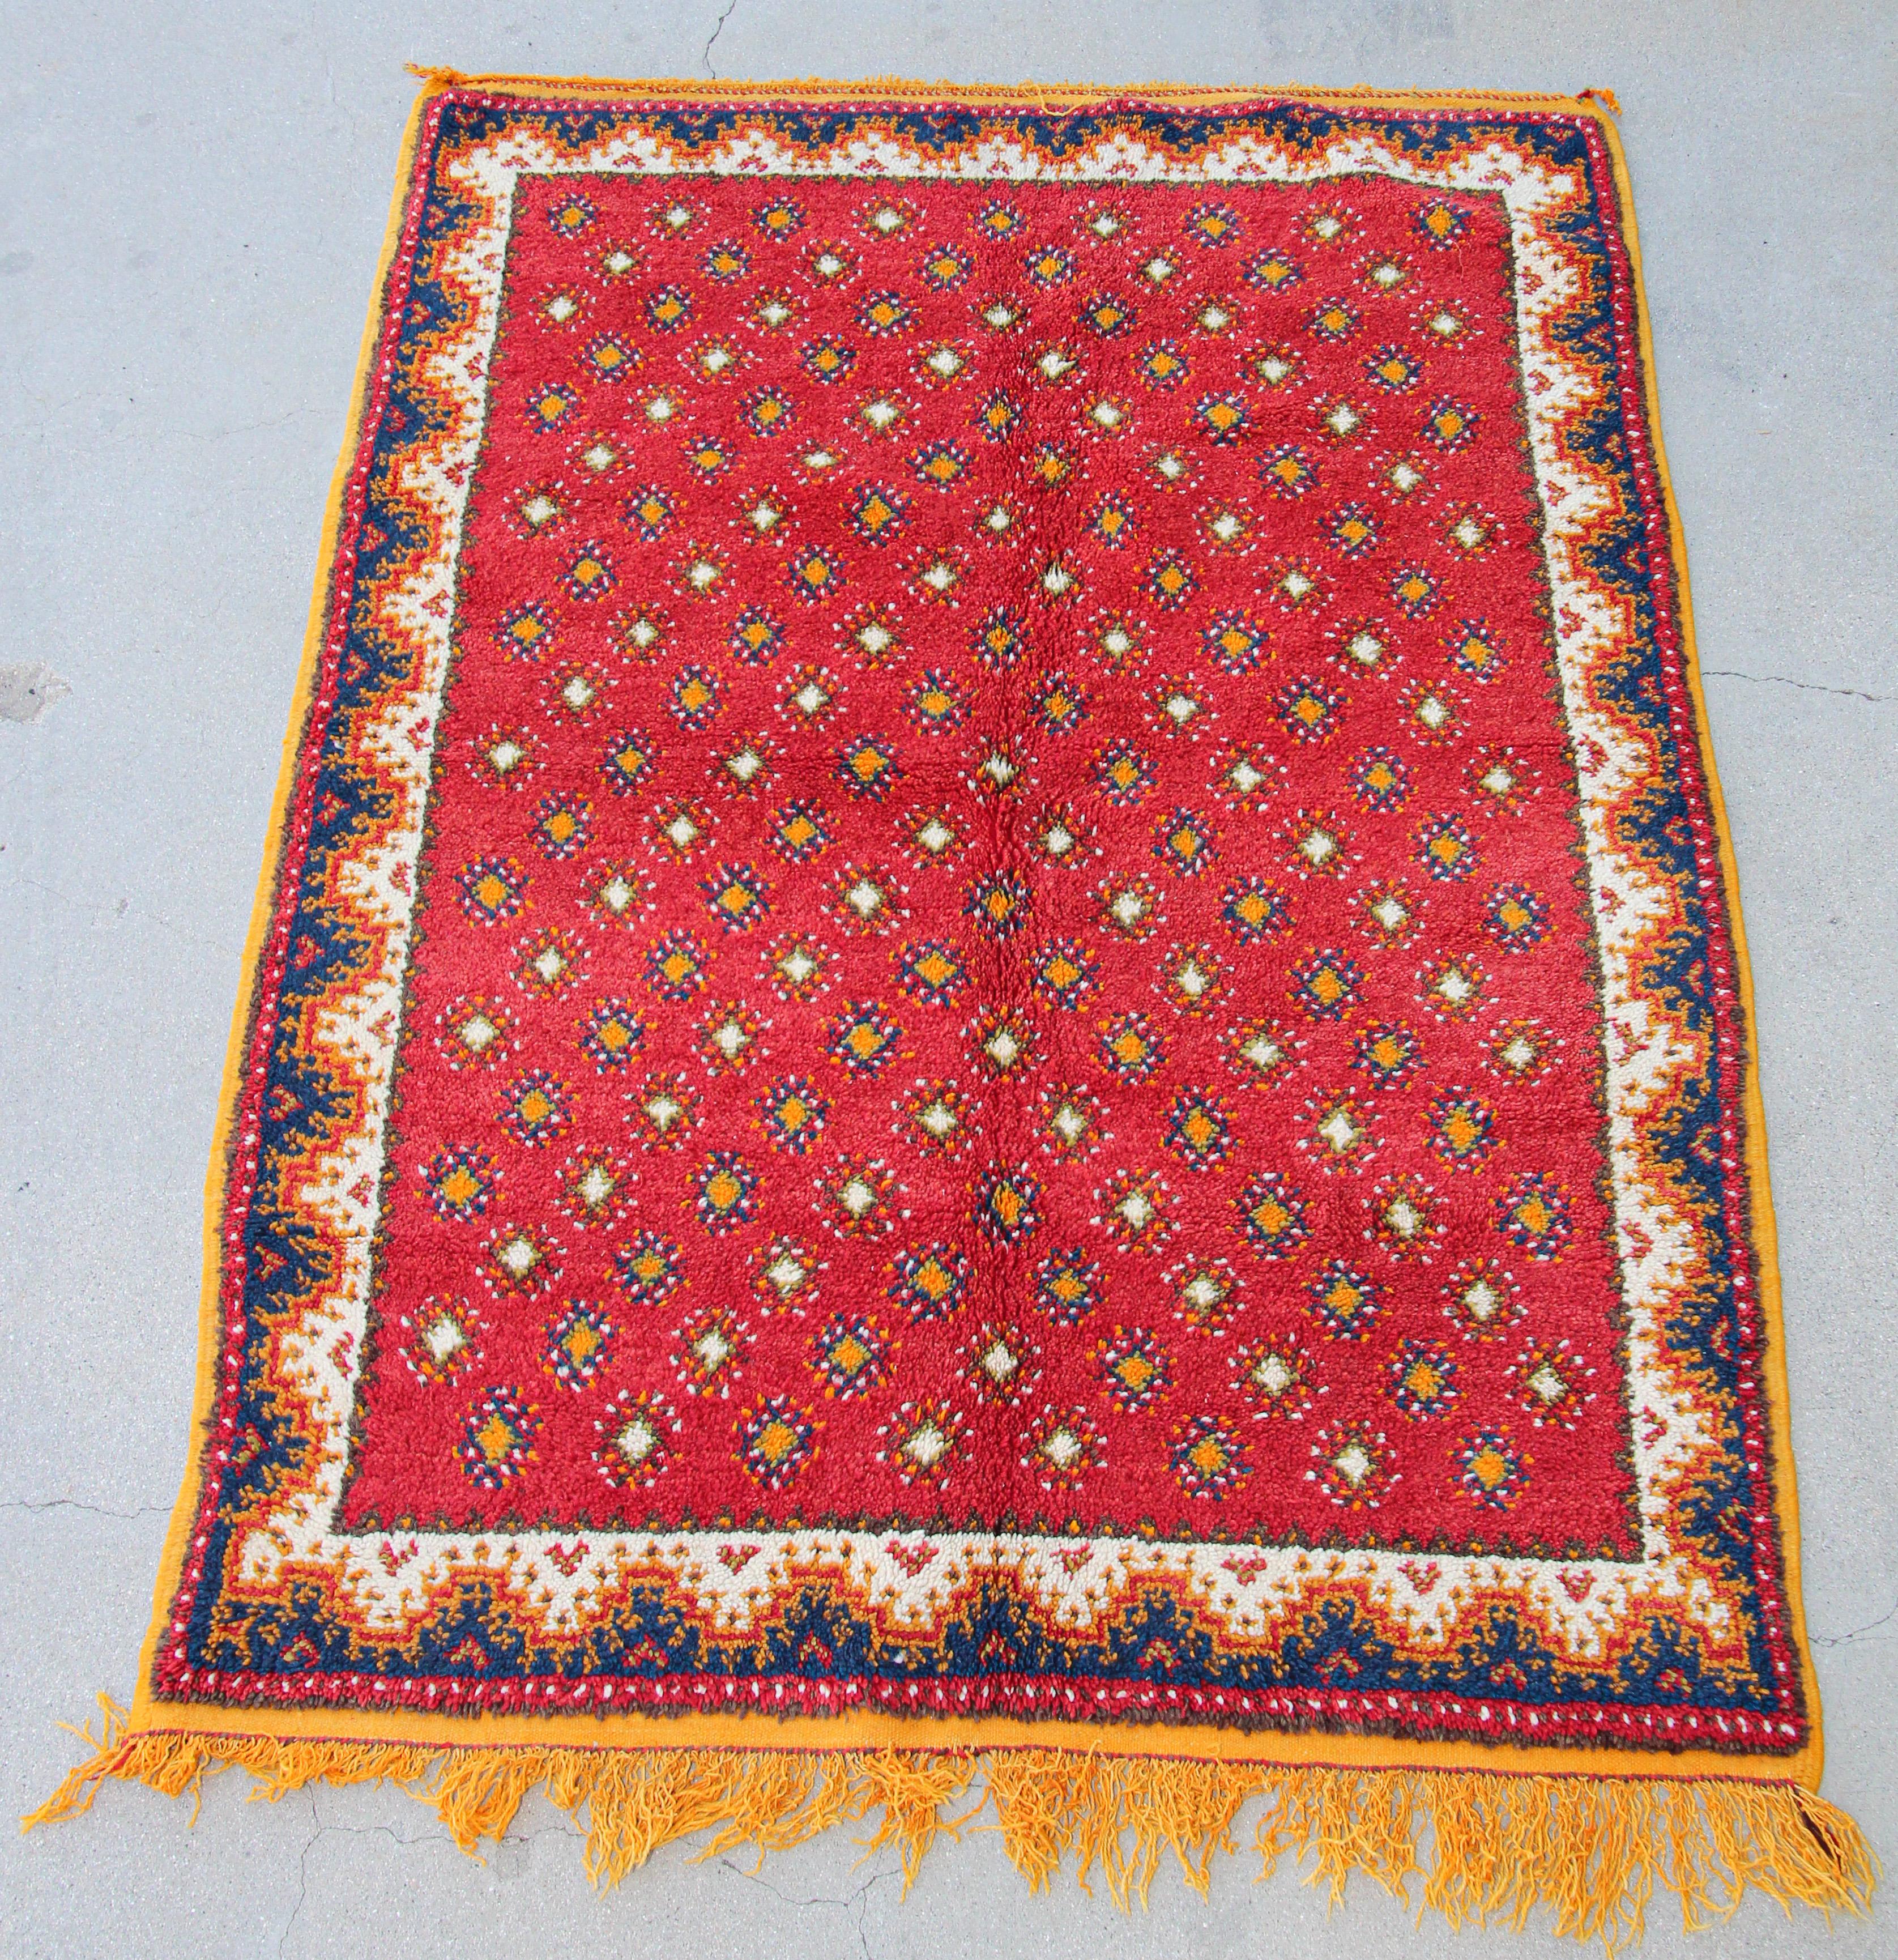 20th Century 1960s Vintage Moroccan Hand-Woven Berber Carpet For Sale